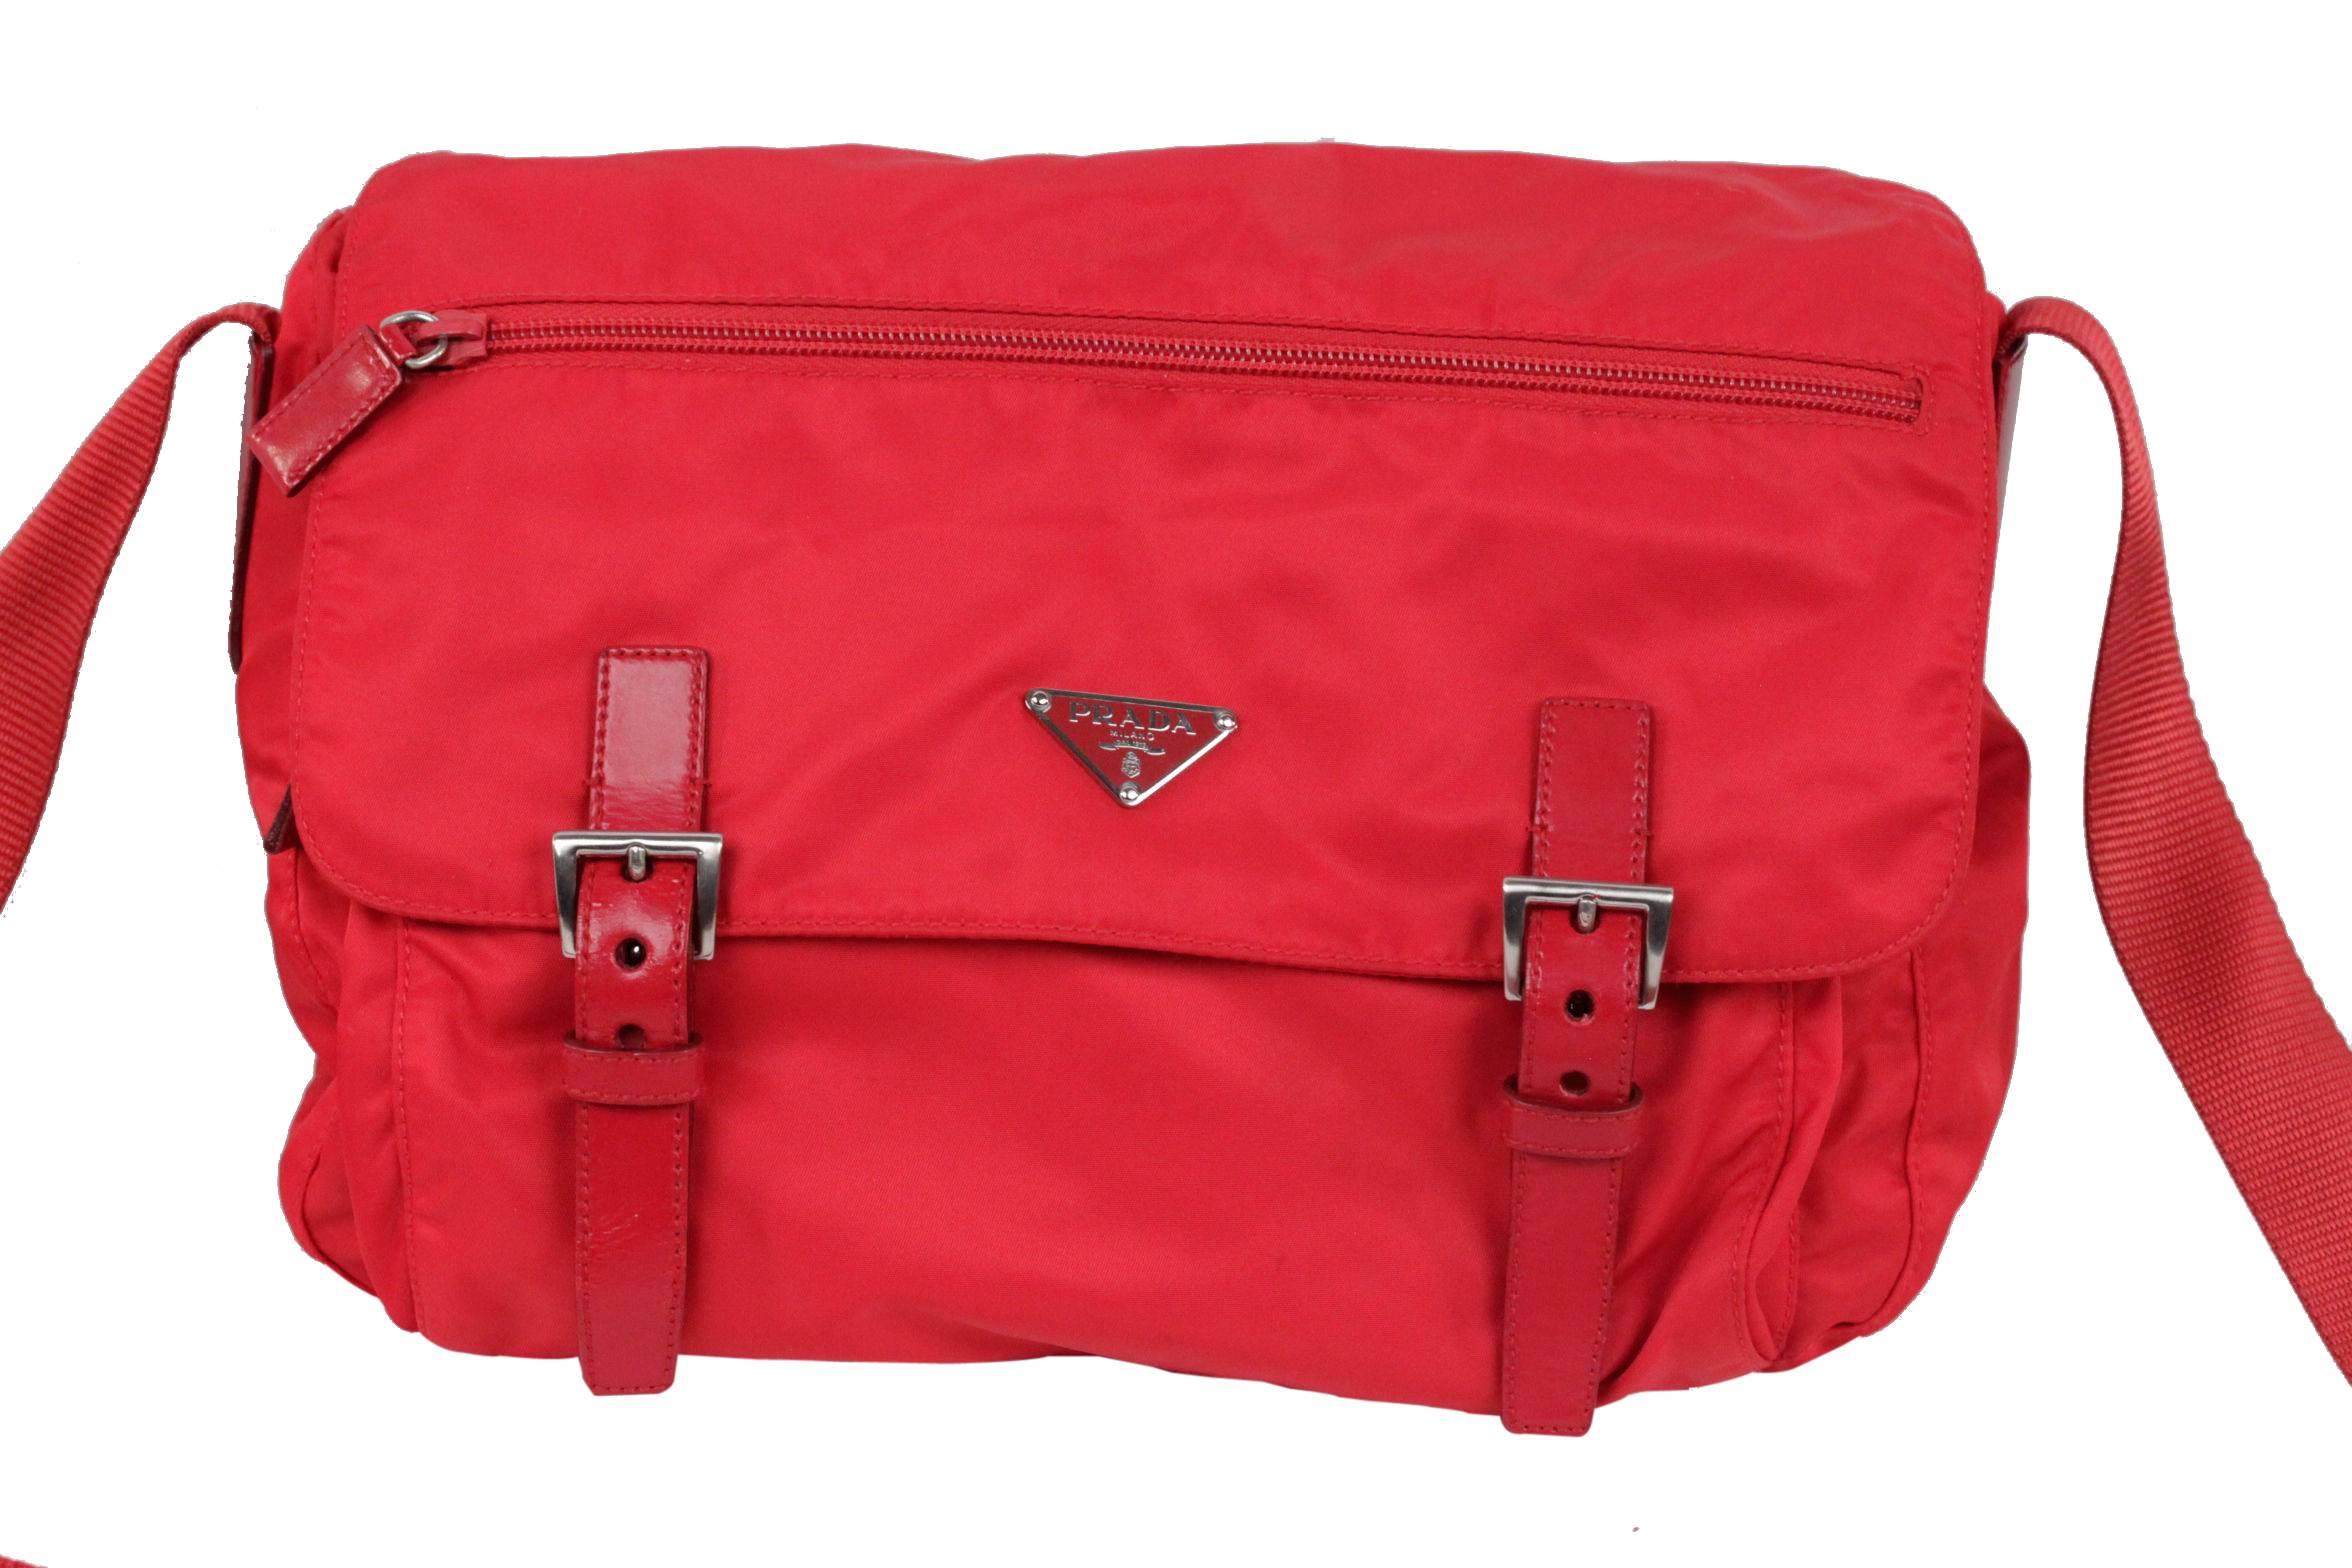 
- Color: Red
- Nylon messenger bag with leather trim
- Silver metal hardware
- Prada logo lining
- Tag logo on the inside and enamel triangle logo on the front
- Flap with double buckle closure
- 1 zipper compartment on the flap and 1 zip